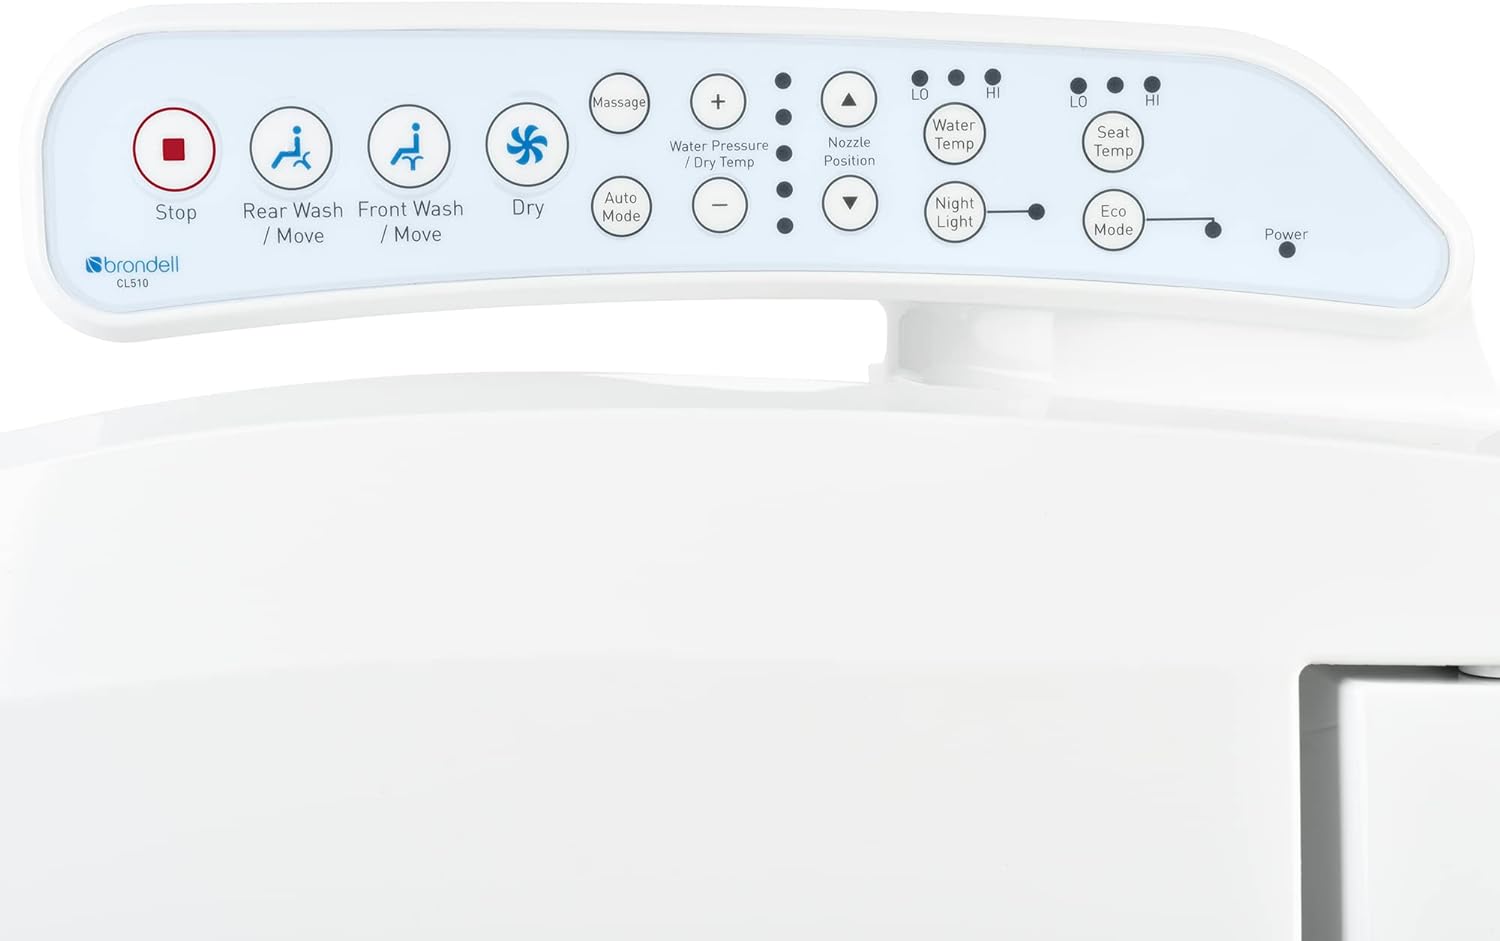 Introducing the CL510 Electric Bidet, an advanced solution for all-day cleanliness and comfort. This smart toilet seat combines true hygiene with innovative design, offering customizable wash settings and one-touch auto mode for a luxurious experience. The sleek shape seamlessly blends into any bathroom décor. Control your wash with intuitive side-arm panel controls, adjusting water pressure, nozzle oscillation, and spray options for a perfect cleanse. Enjoy adjustable water temperature and a heated toilet seat for added comfort. Experience convenience and hygiene with illuminating LED light, a quiet gentle-close lid, and aerated water wash. The self-clean cycle ensures cleanliness, and the retractable nozzle stays clean after each use. Promoting sustainability, this bidet seat offers an optional eco mode and is a sustainable alternative to toilet tissue and flushable wipes. Installation is quick and easy with the included power cord, making it a hassle-free addition to your elongated toilet. Upgrade to the CL510 Electric Bidet for a cleaner, more comfortable, and eco-friendly bathroom experience.